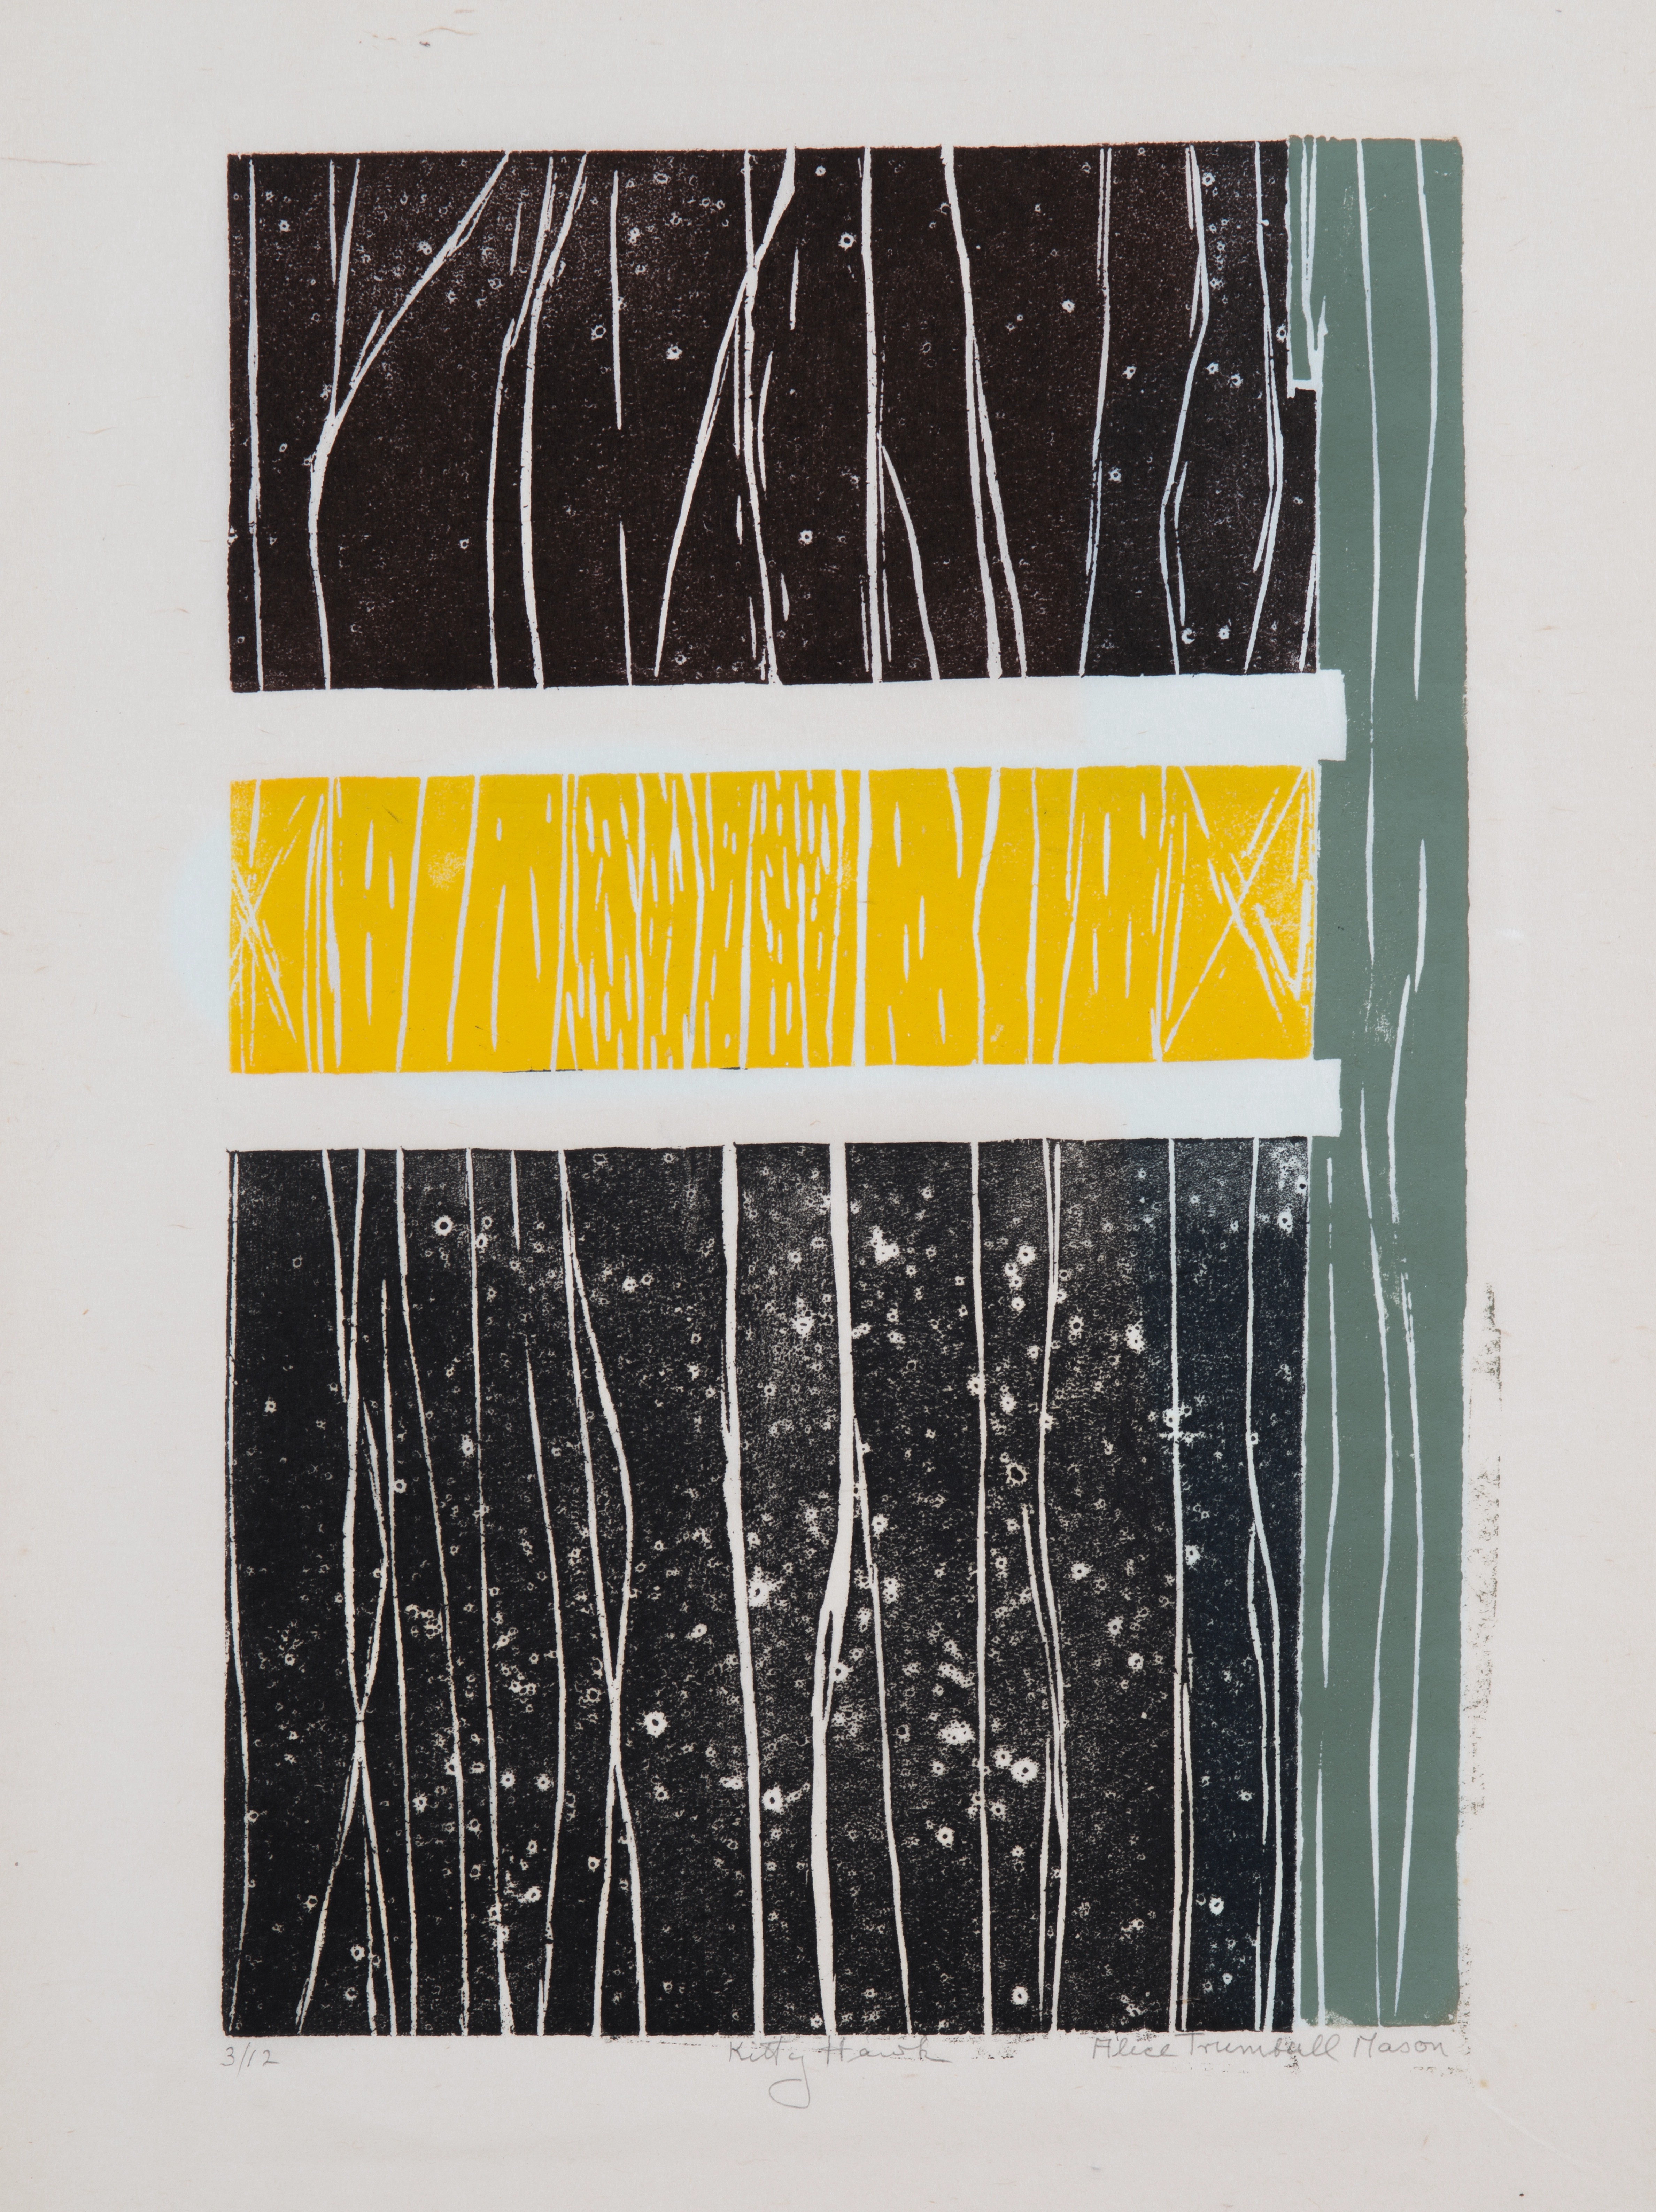 Abstract print on paper, comprised of black, white, and yellow horizontal rectangles on the left and one vertical, thin, grey rectangle on the right. The overall composition has organic lines from woodgrain over all of the forms.